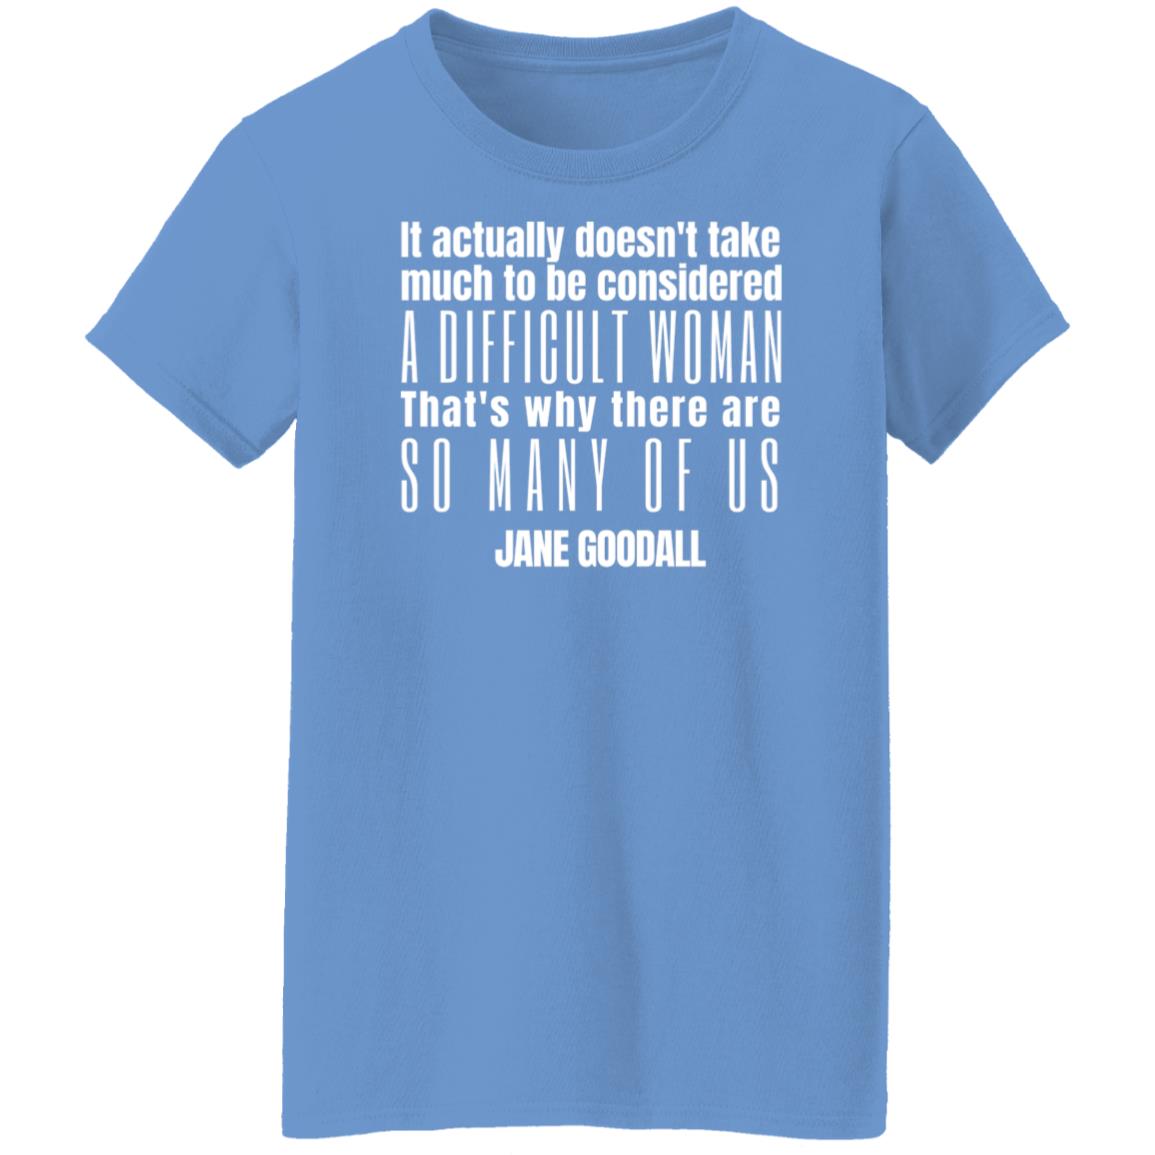 Jane Goodall Difficult Woman Quote T-Shirt